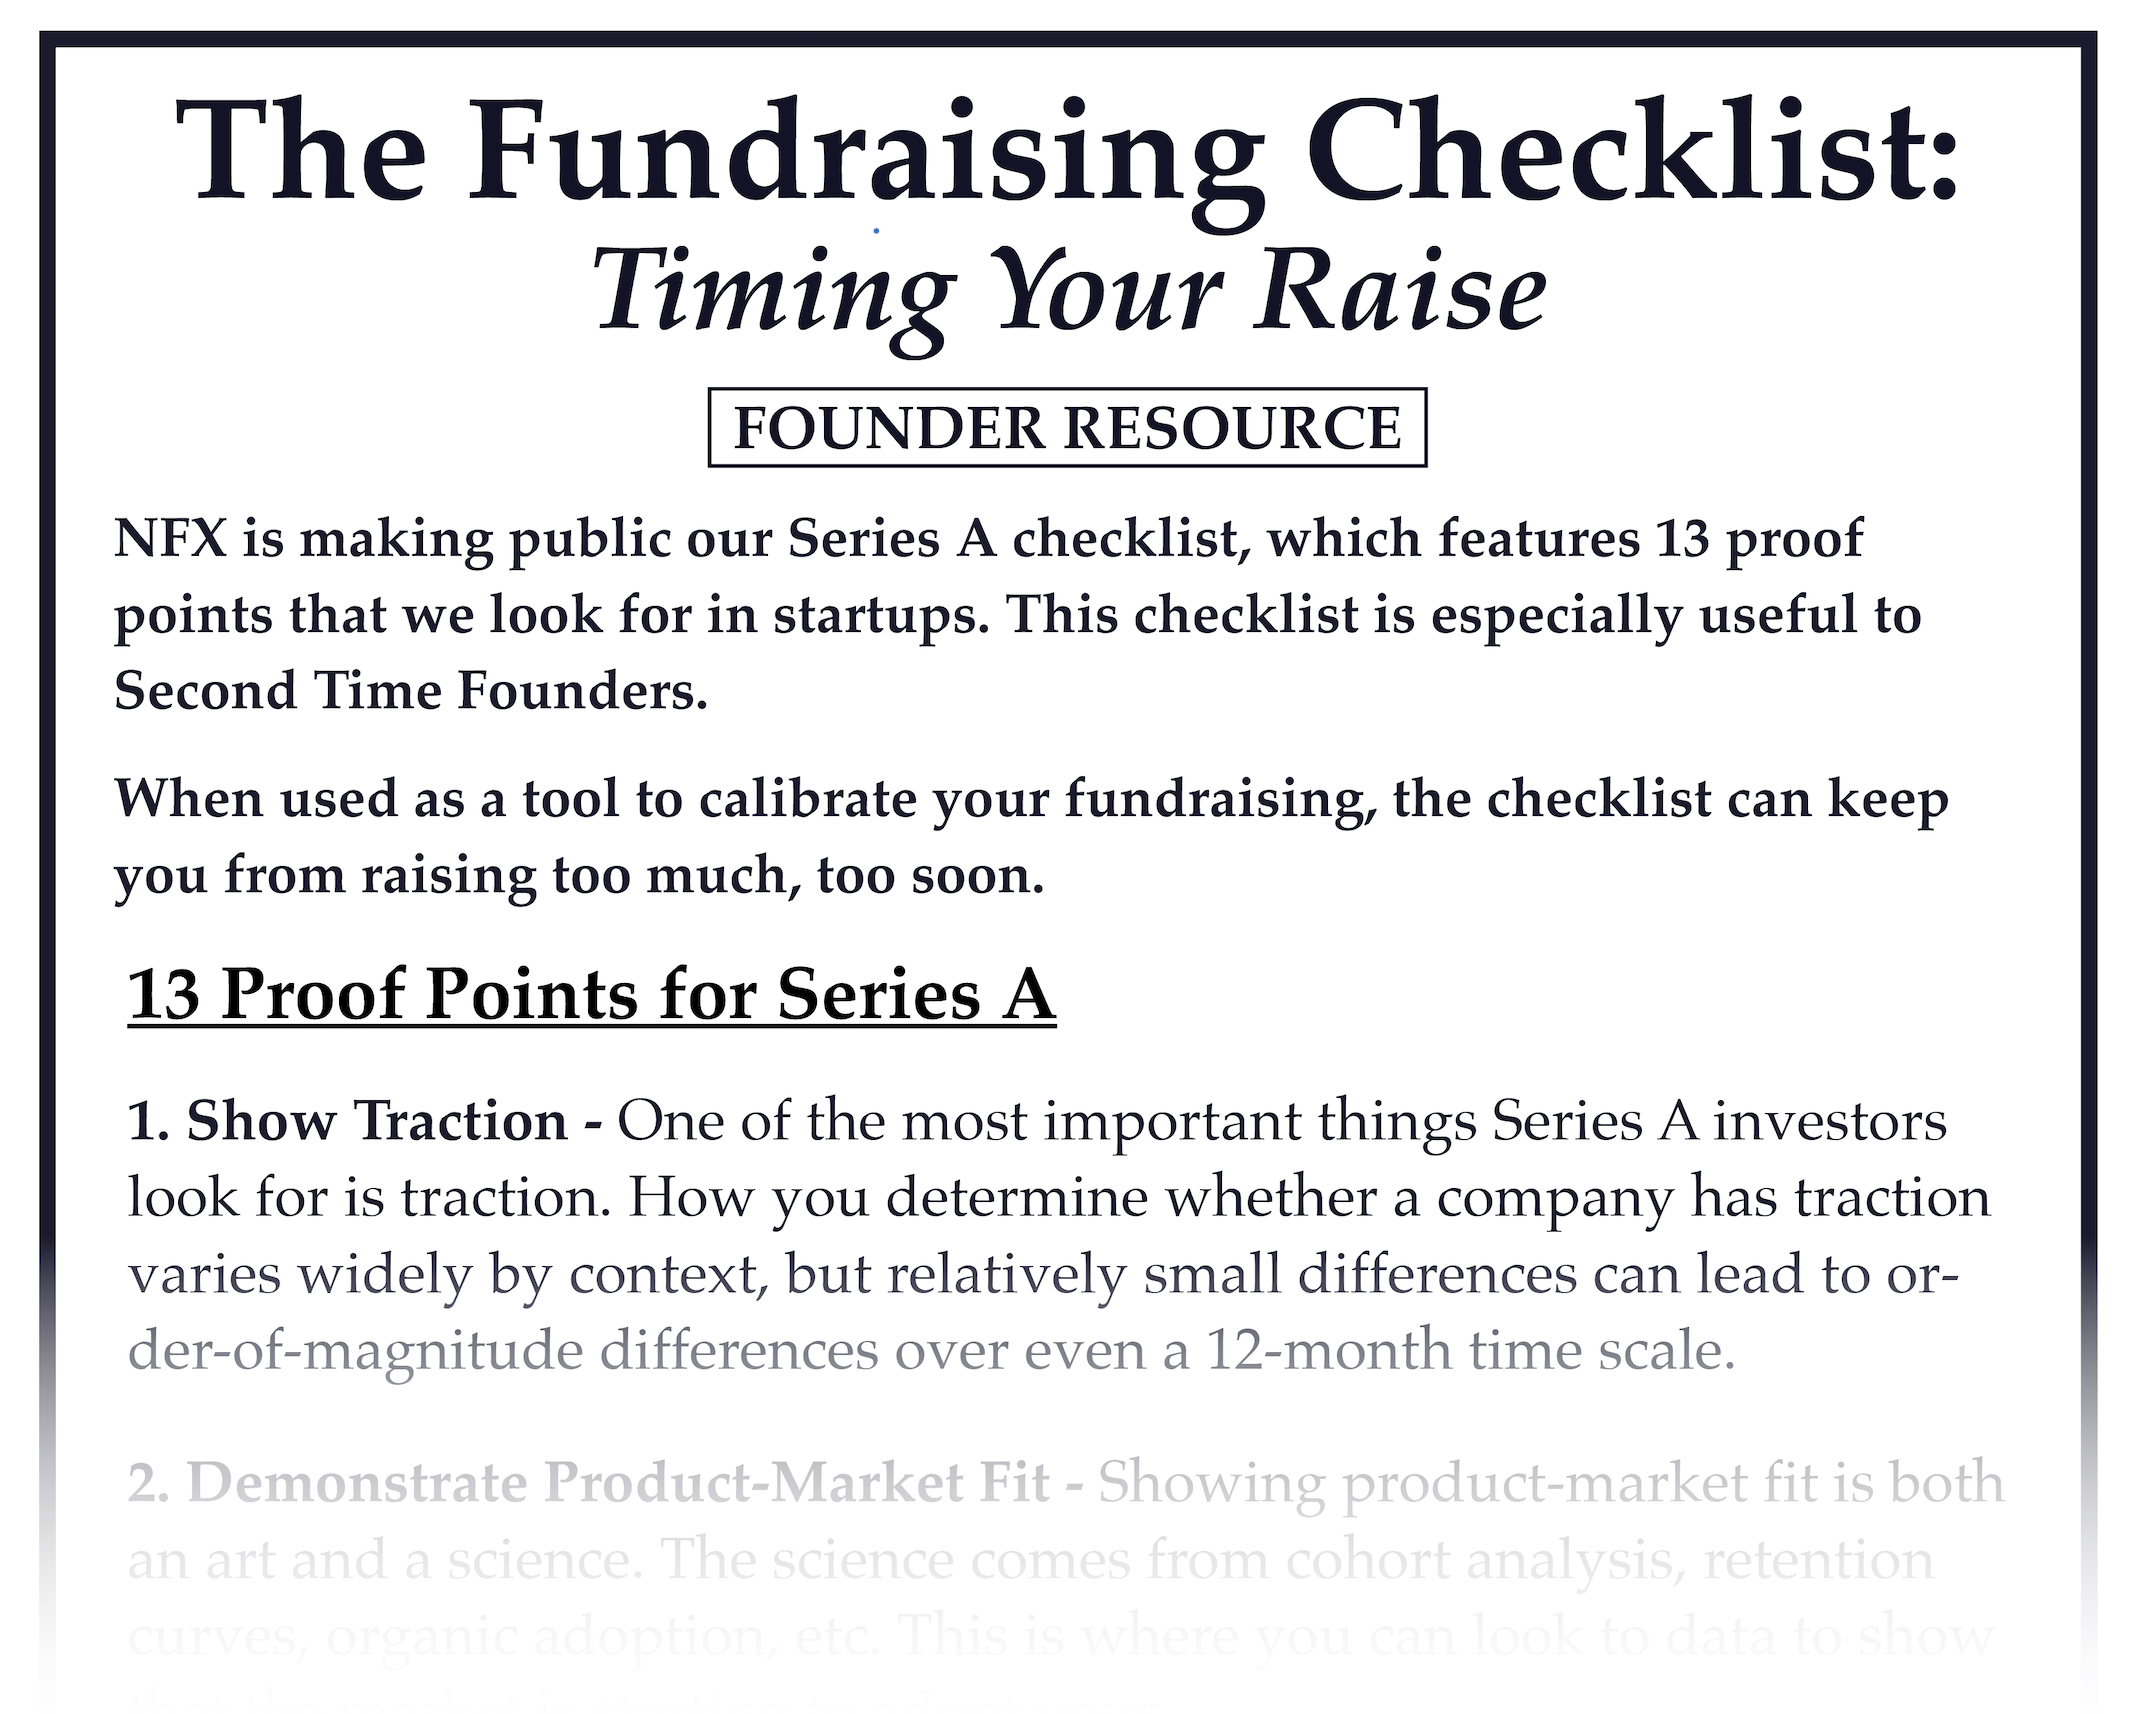 The NFX Fundraising Checklist